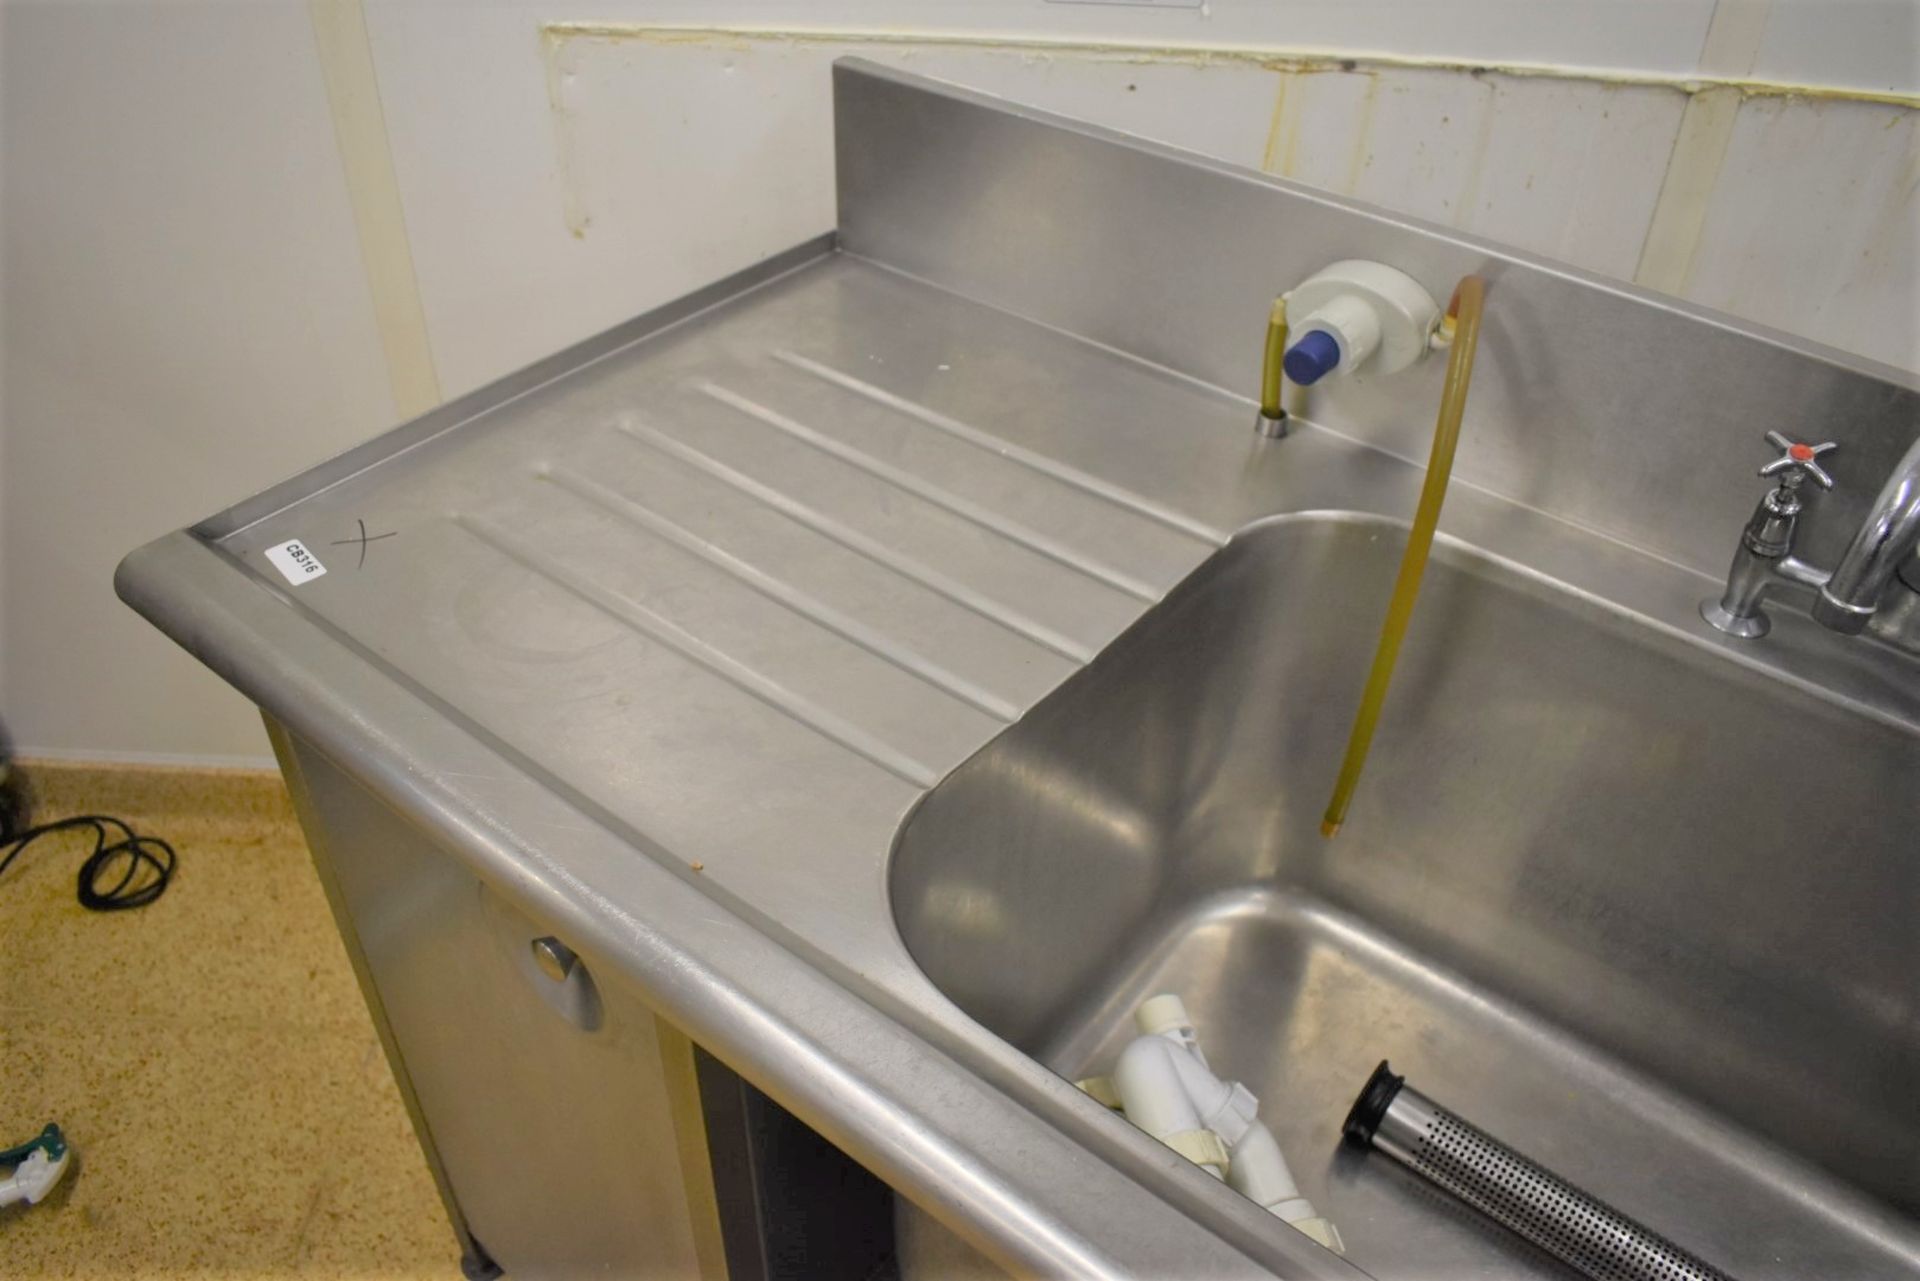 1 x Large Stainless Steel Wash Unit With Twin Deep Sink Basins, Hose Rinser Tap, Mixer Taps, - Image 3 of 10